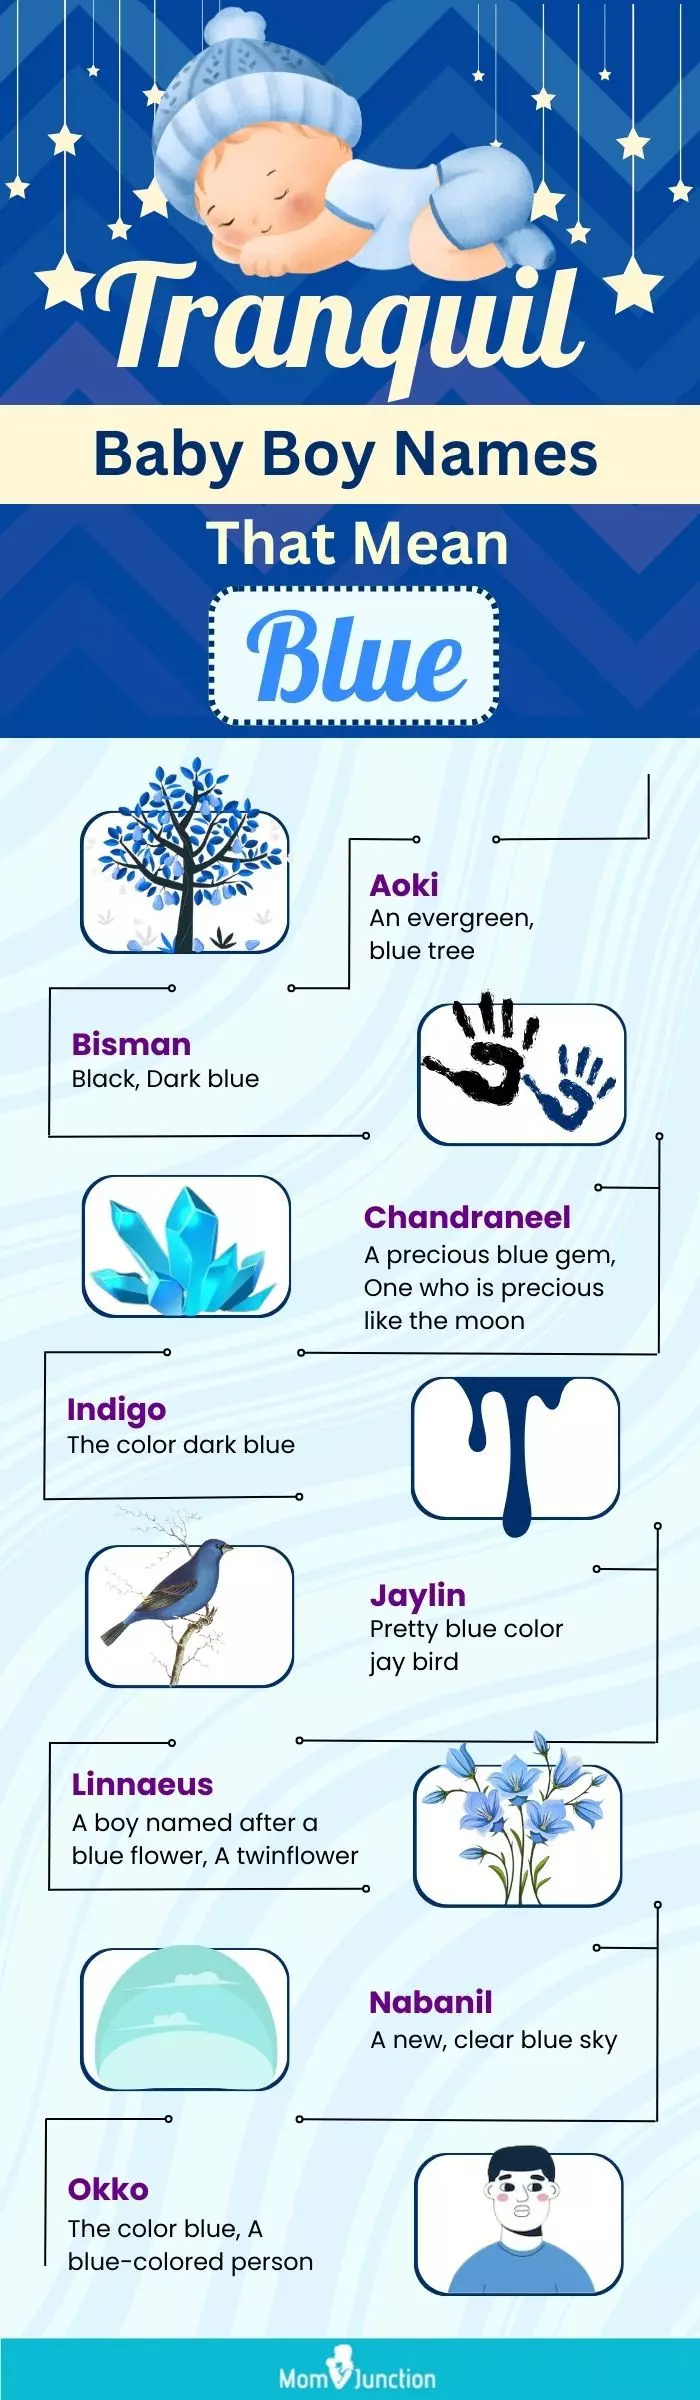 tranquil baby boy names that mean blue(infographic)